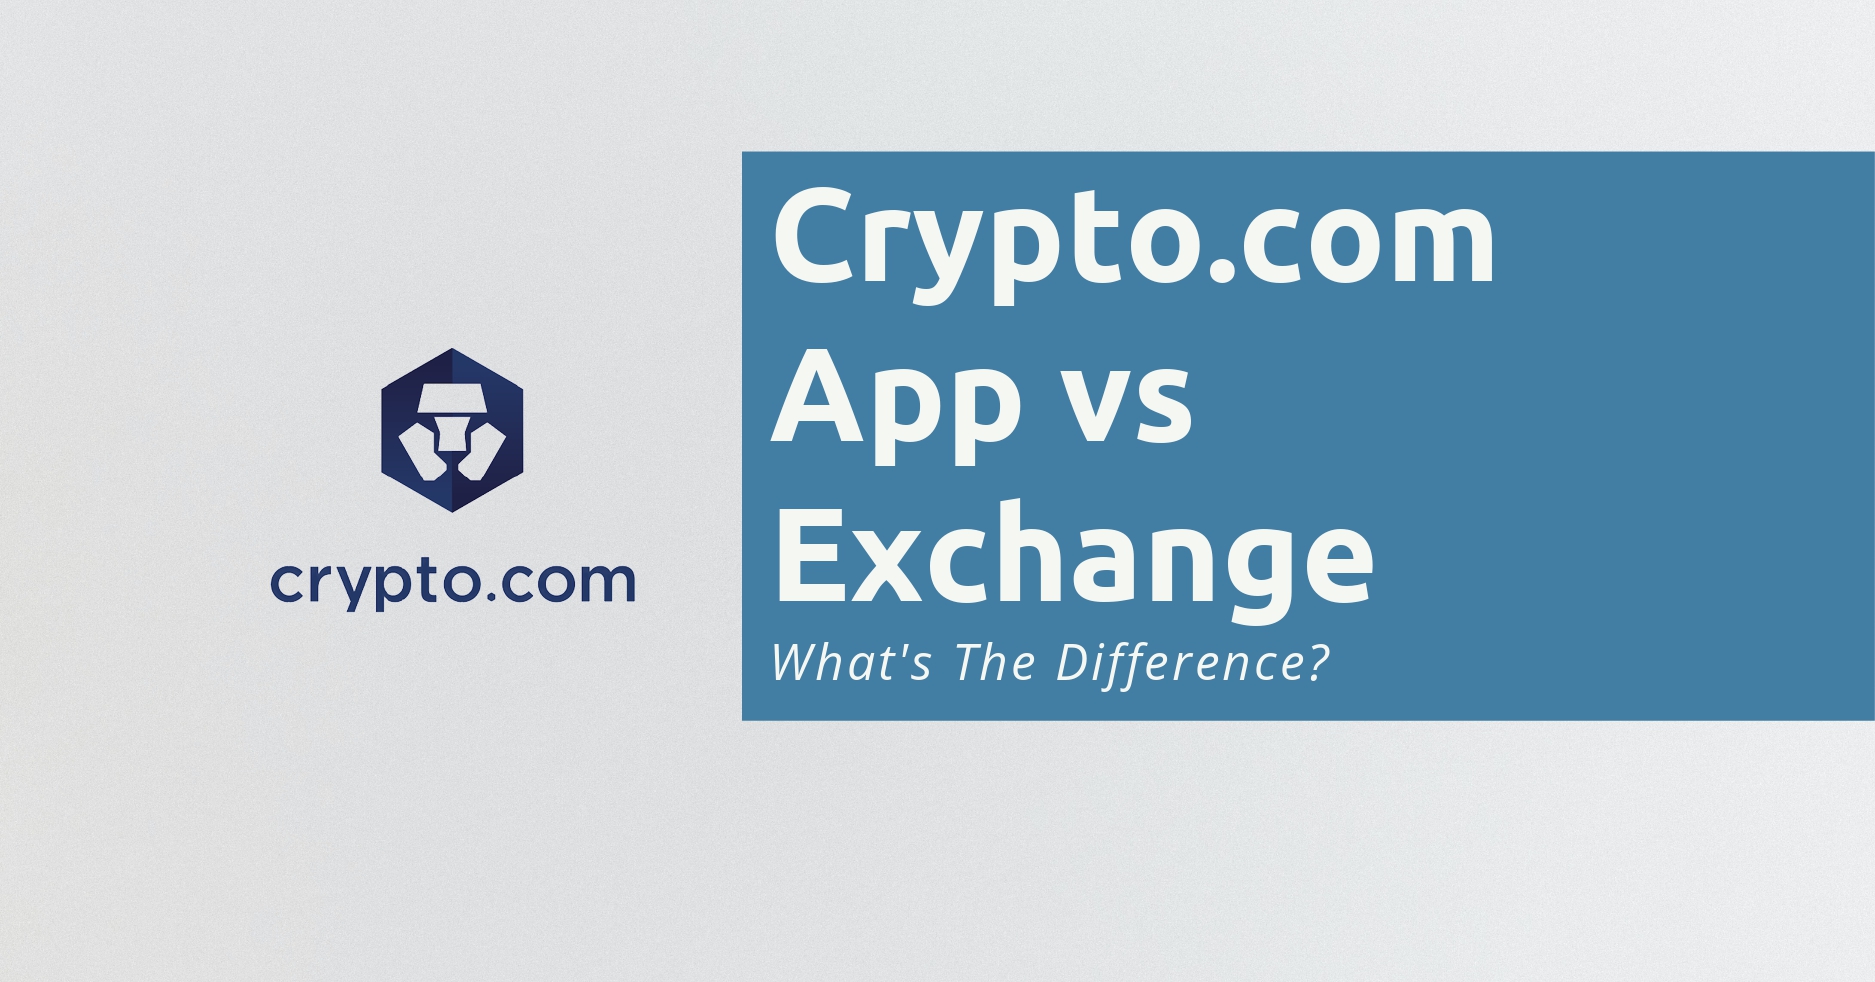 what is the difference between crypto.com app and crypto.com exchange